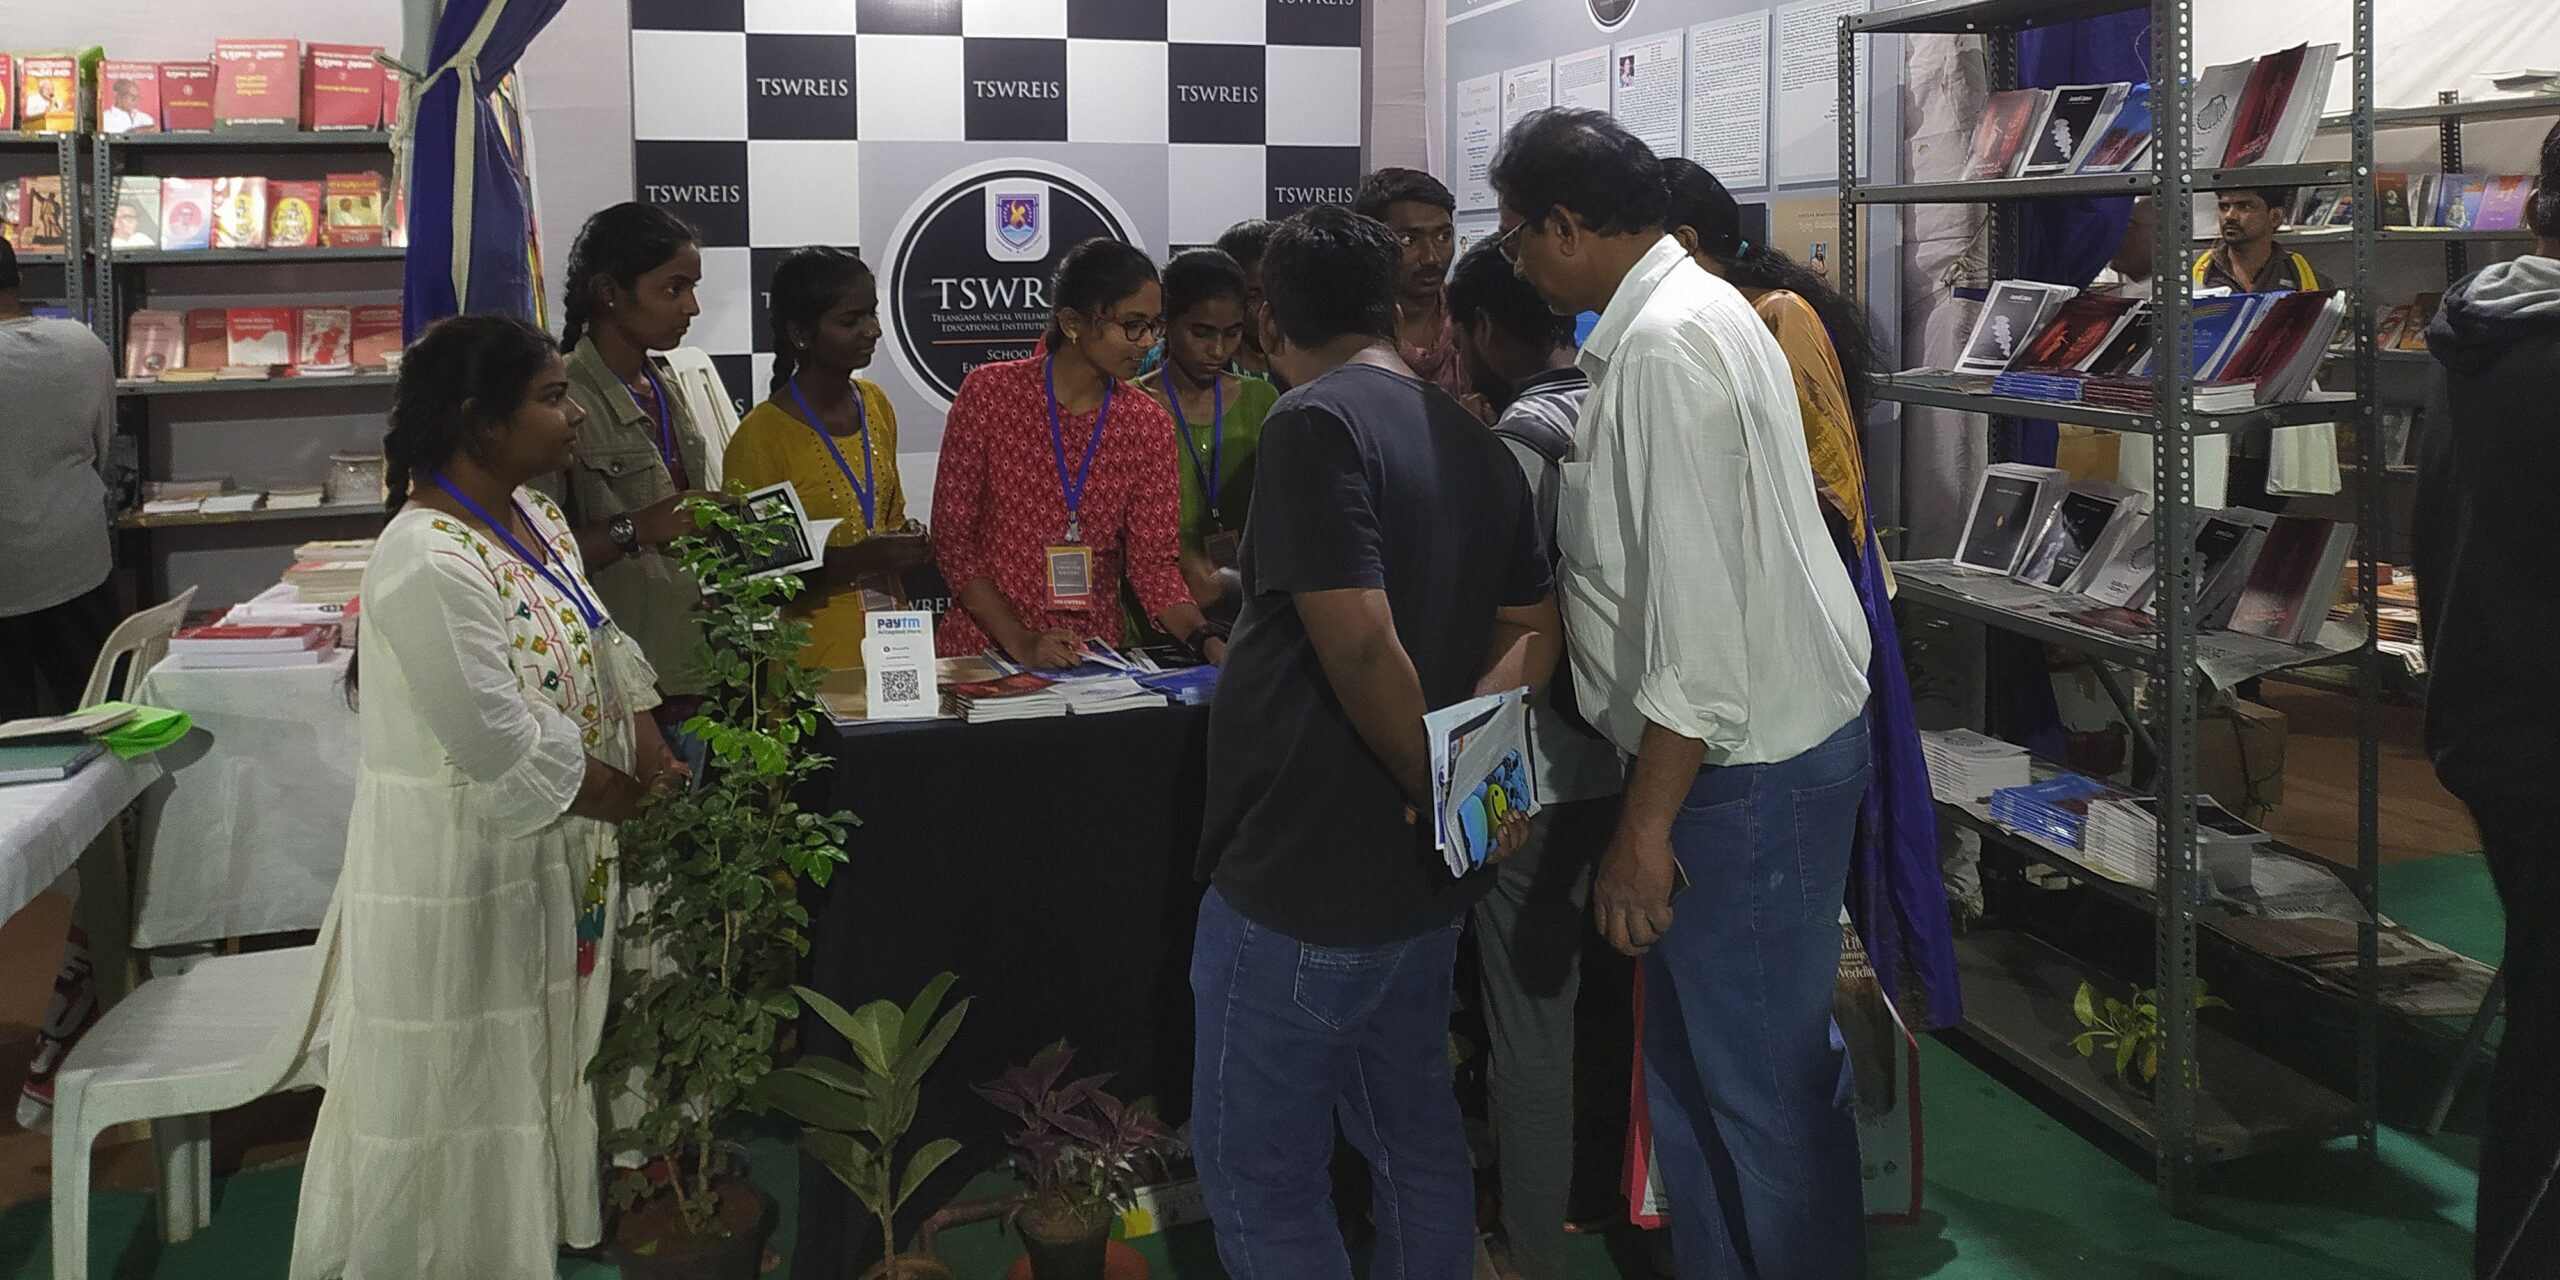 Budding authors display their works at Hyderabad Book Fair